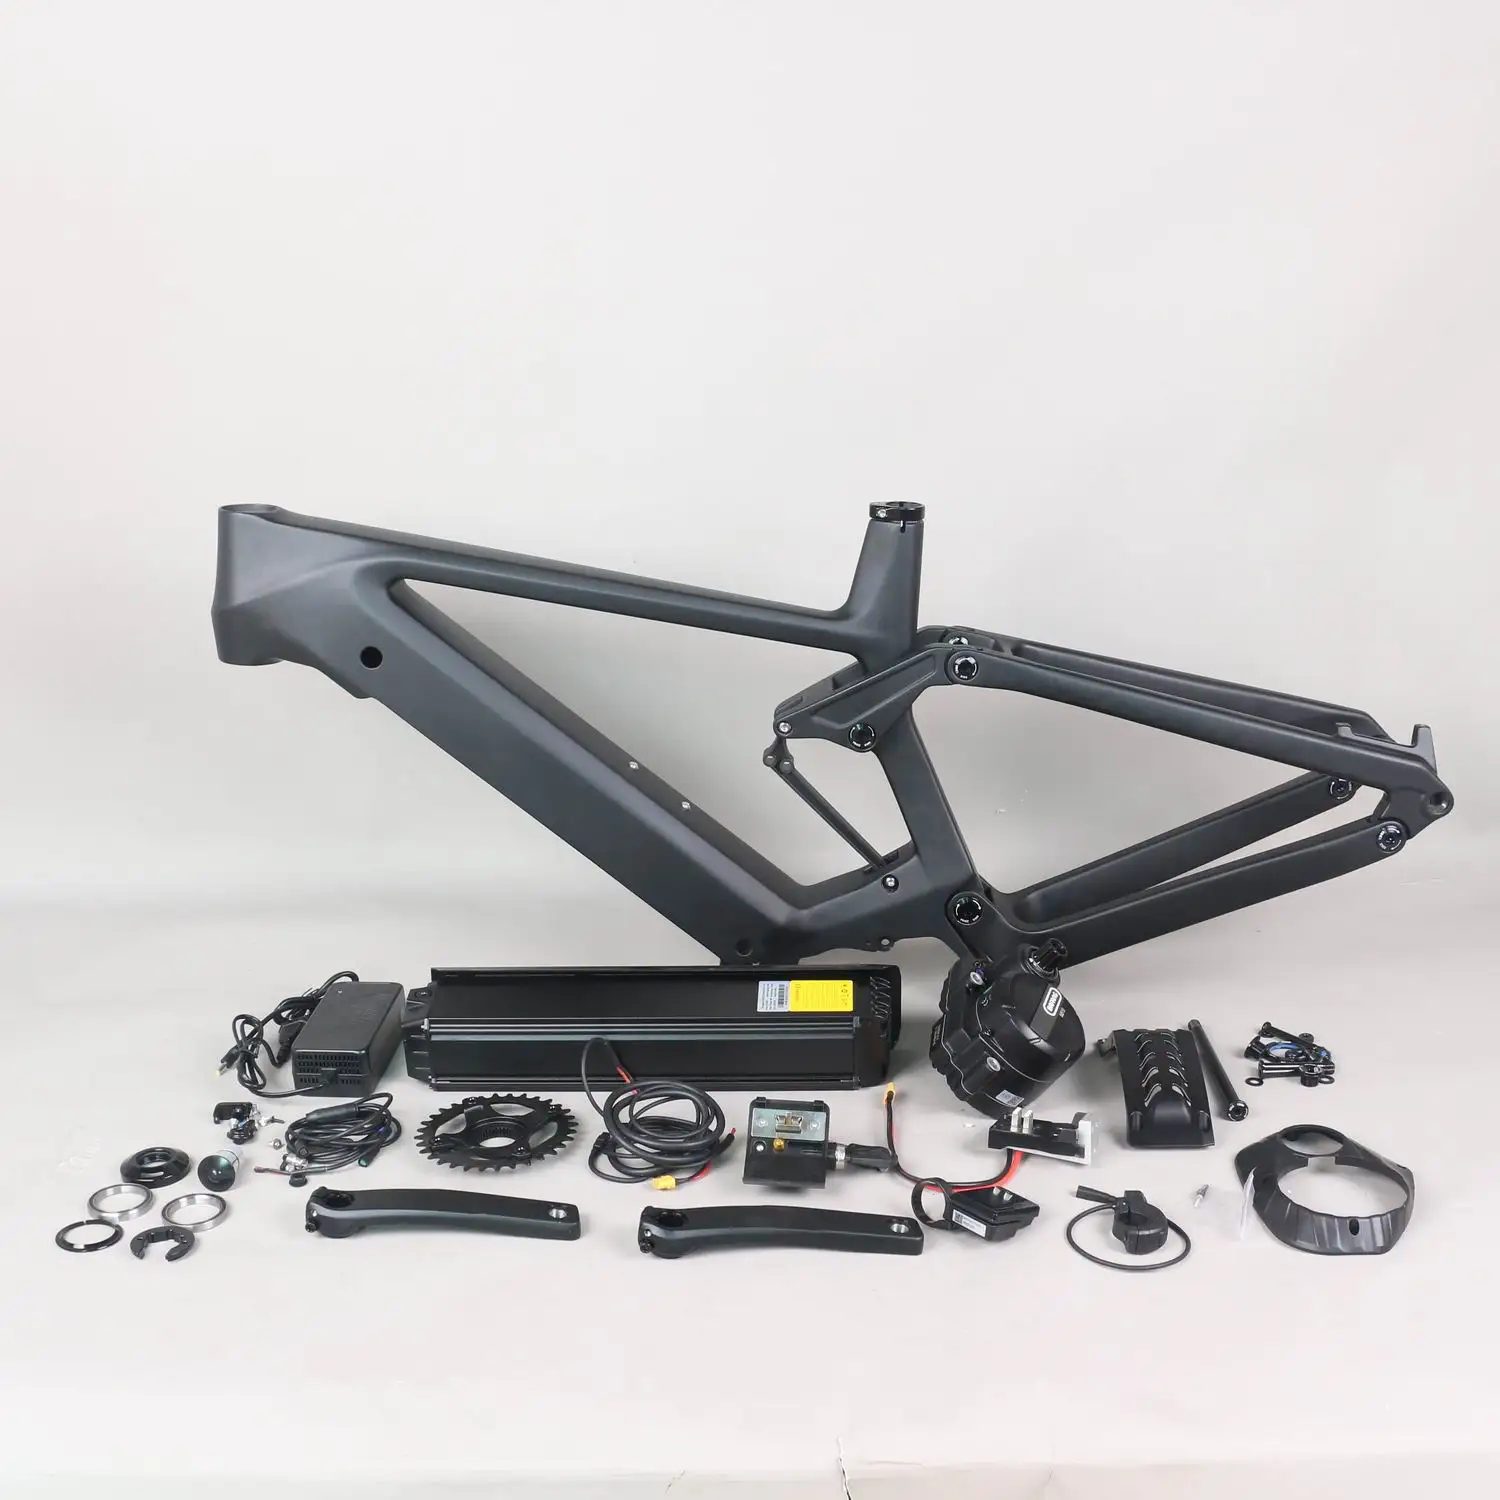 29er Suspension E-MTB Bike Carbon Frame E69 Compatible with Bafang M510 M500 M600 mid motor 250W  include motor and battery